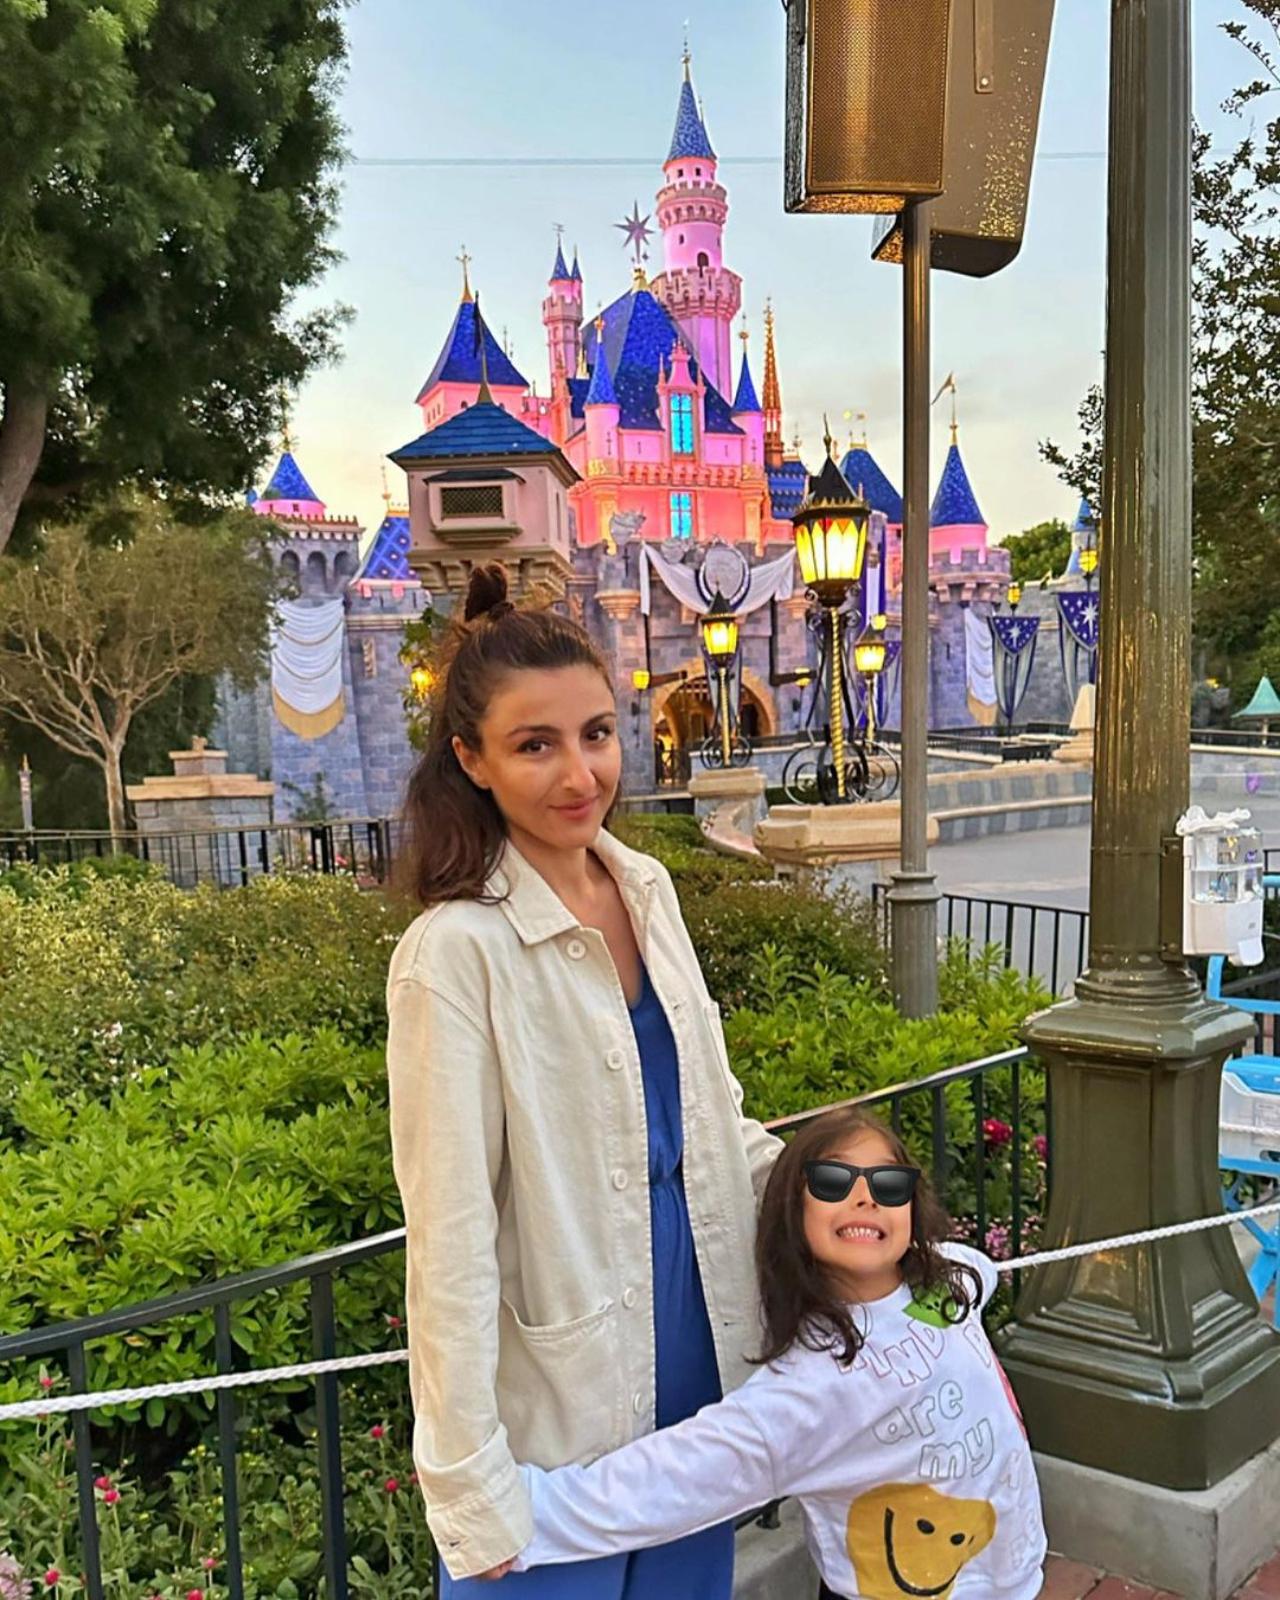 Sweetest Inaaya is here to pose with her mother! She looks (ultra) excited about the glowing pink castle in the background